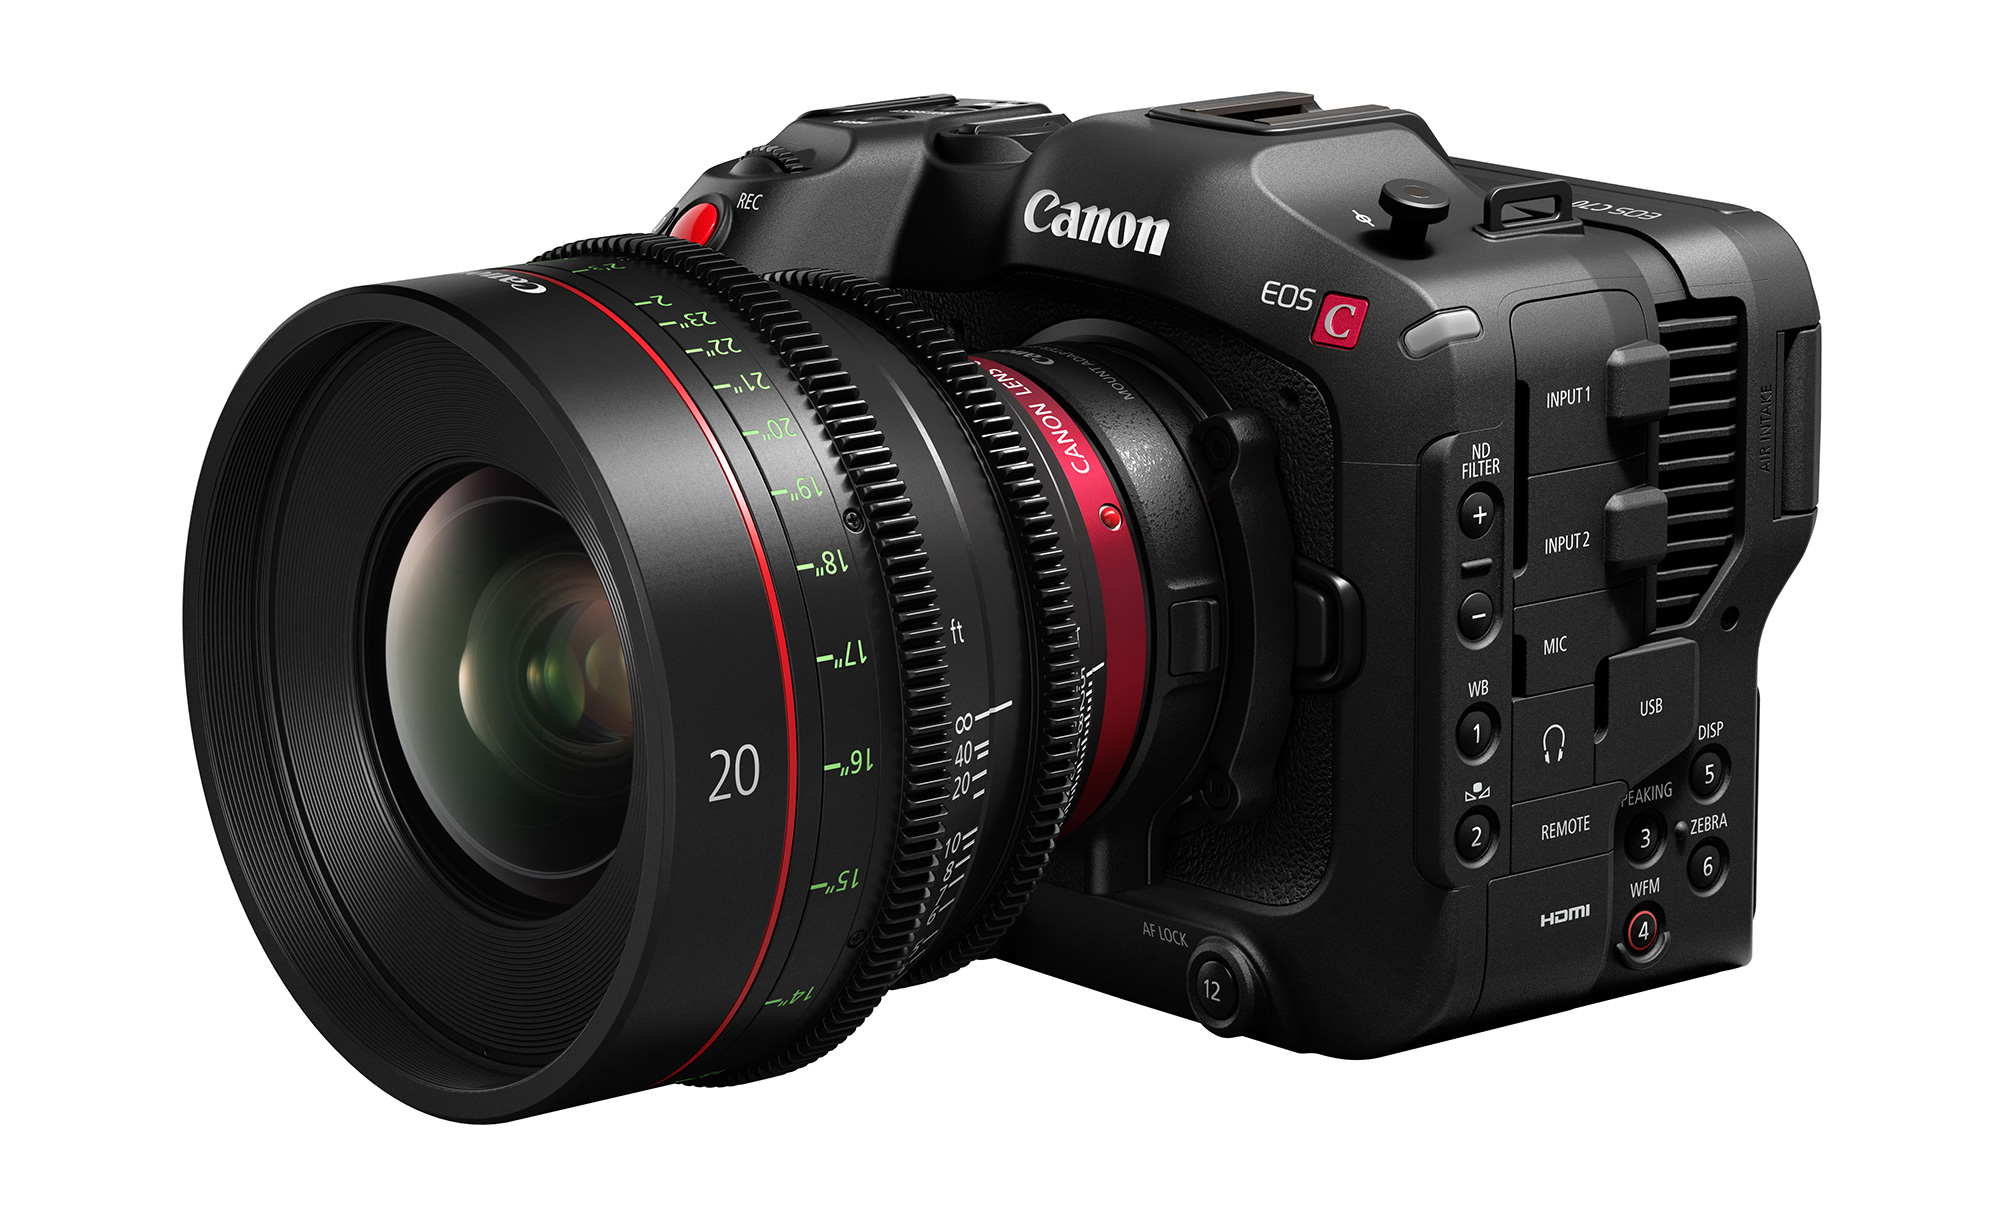 Canon C70 update - XC protocol, better autofocus and 600Mbps XF-AVC up to 60p